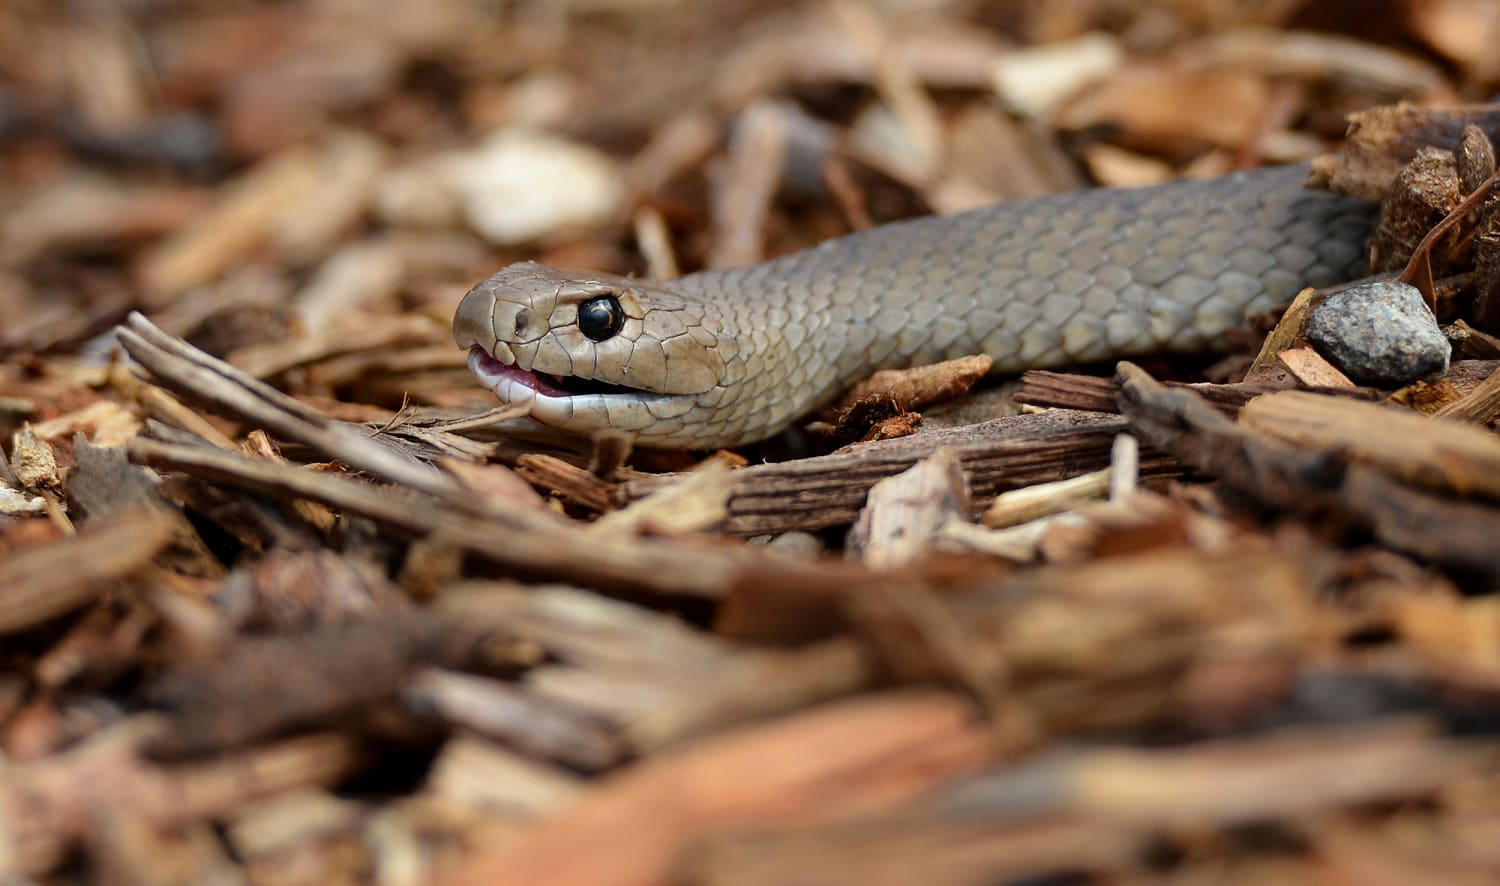 Australian who 'wasn't sure where he was' lucky to be alive after bite from highly venomous snake hiding in his car